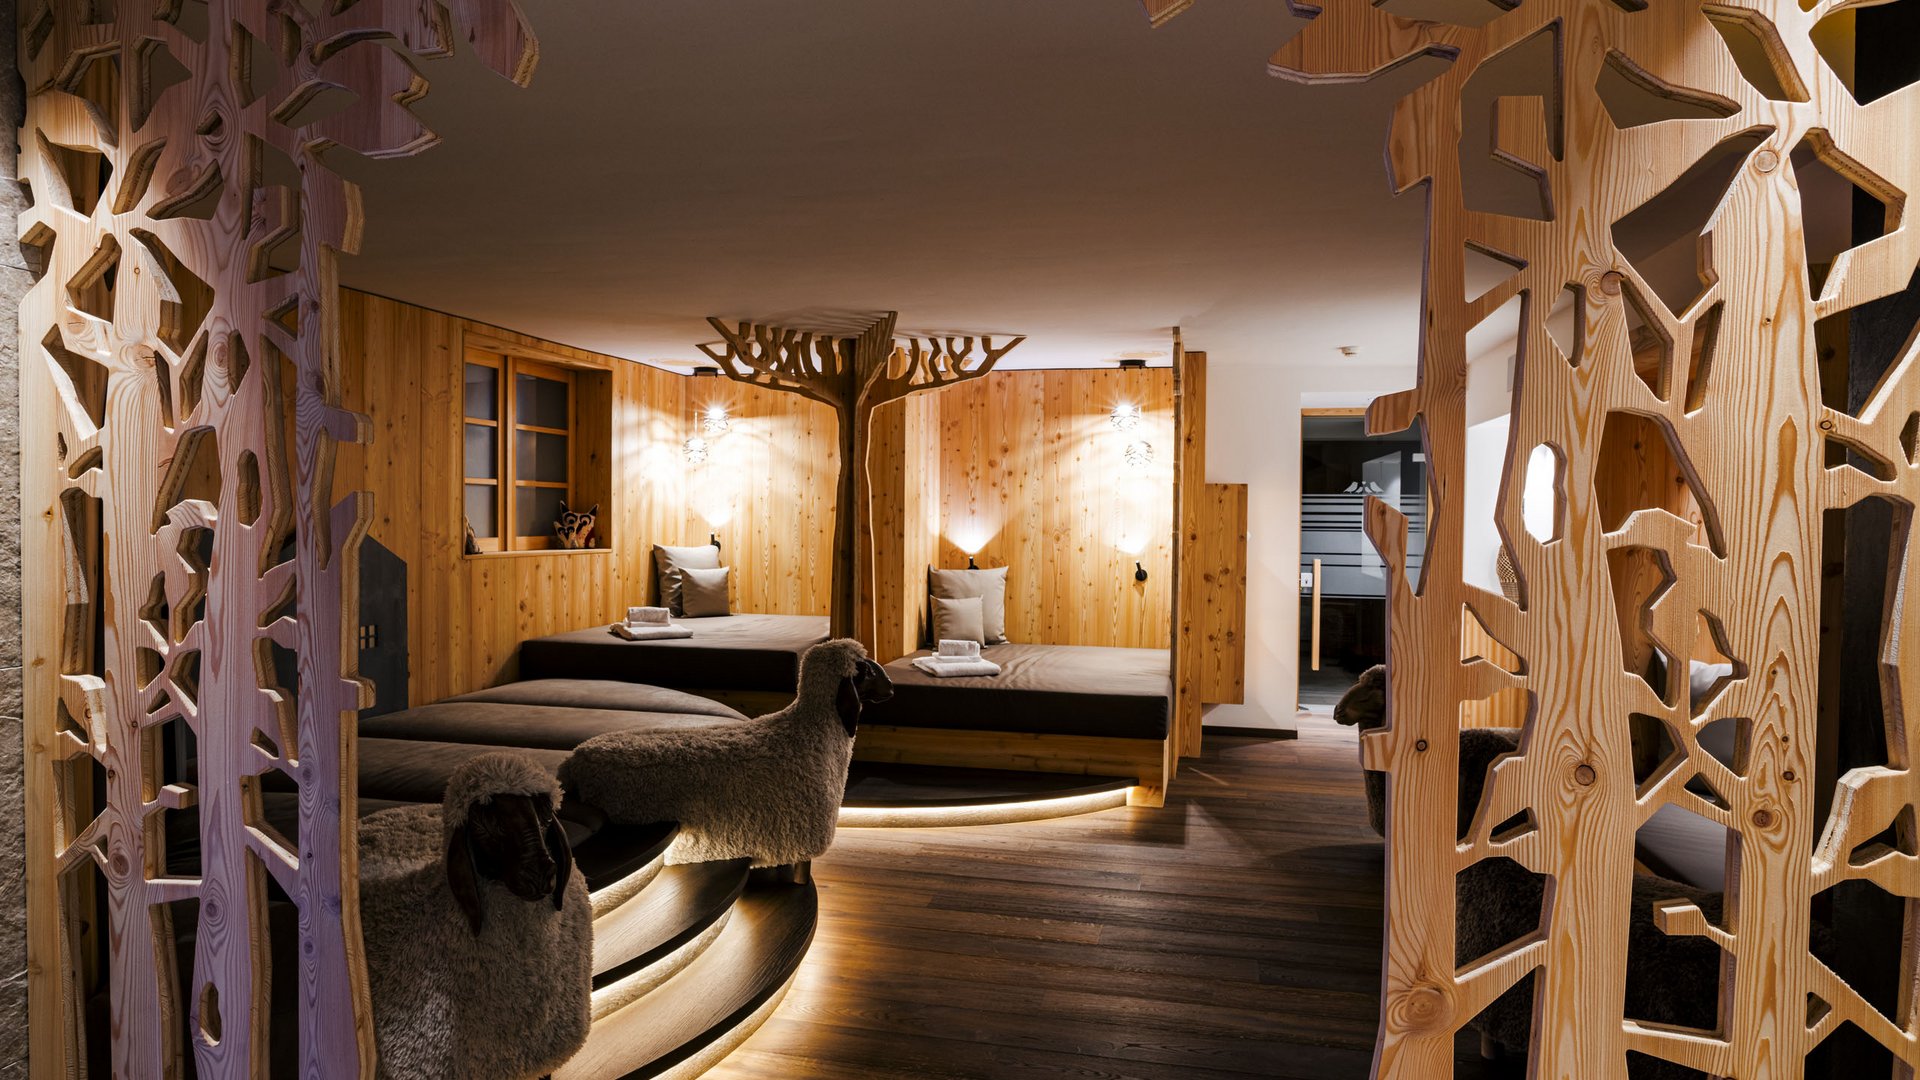 Family hotel in Val Gardena? Welcome to the Posta!